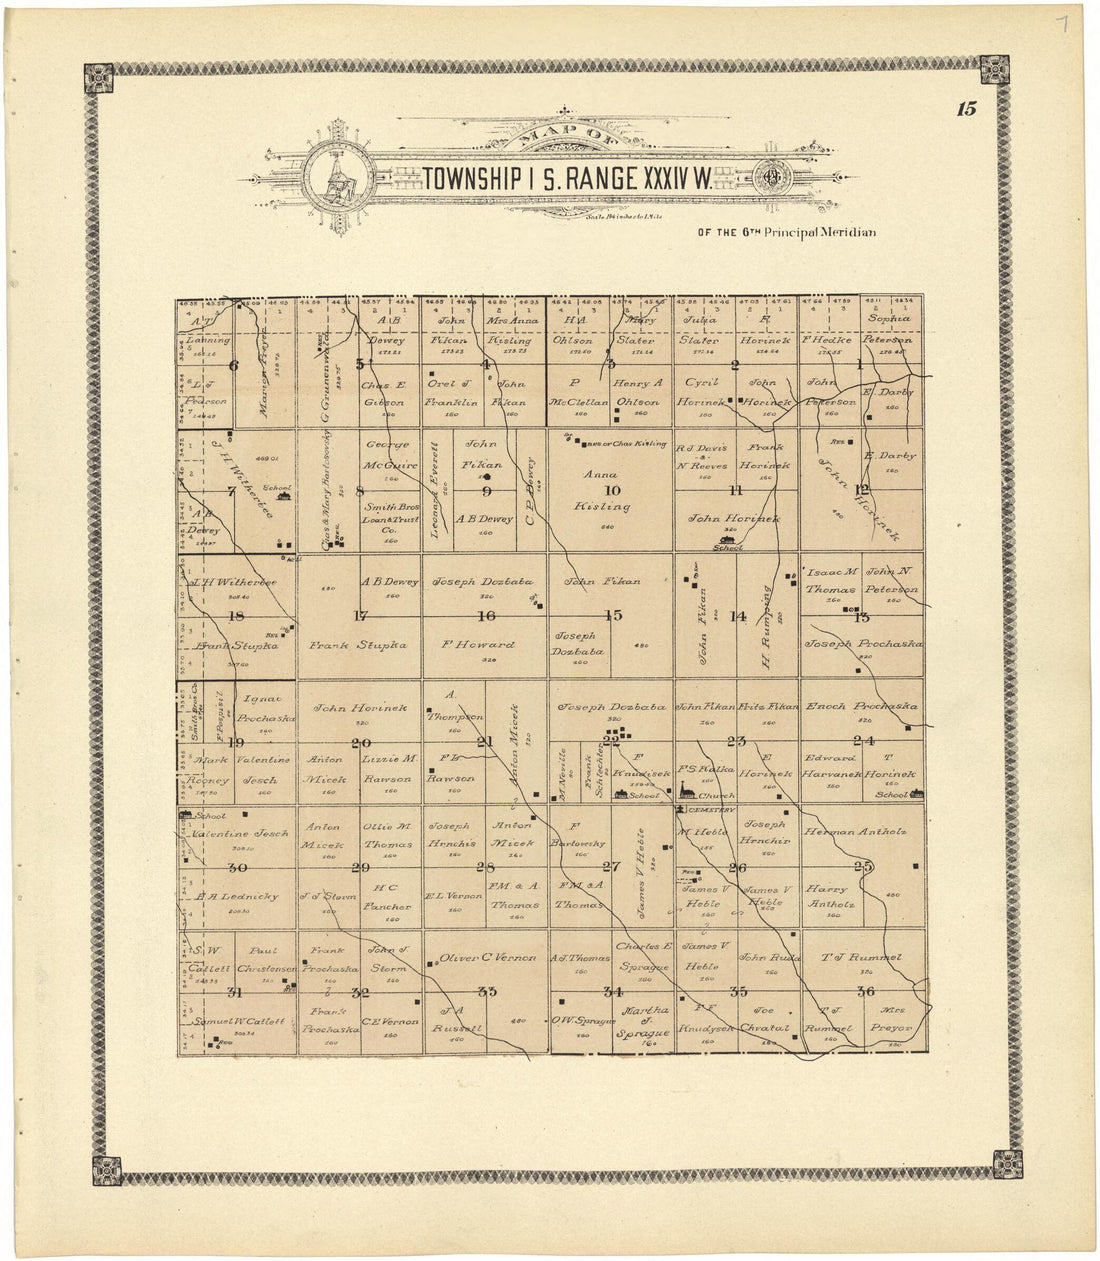 This old map of Map of Township 1 S. Range XXXIV W. from Standard Atlas of Rawlins County, Kansas from 1906 was created by  Geo. A. Ogle &amp; Co in 1906